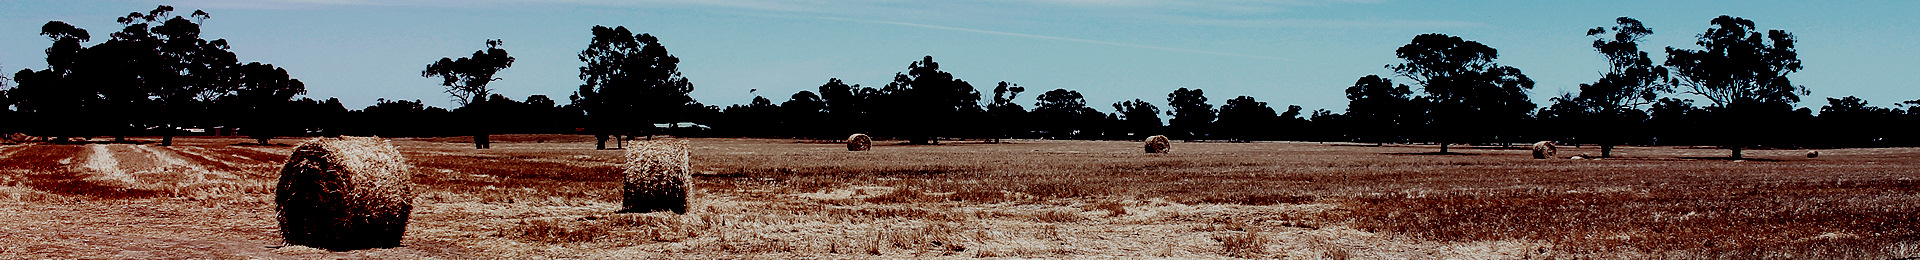 Photograph: Harvested wheat bales in field.